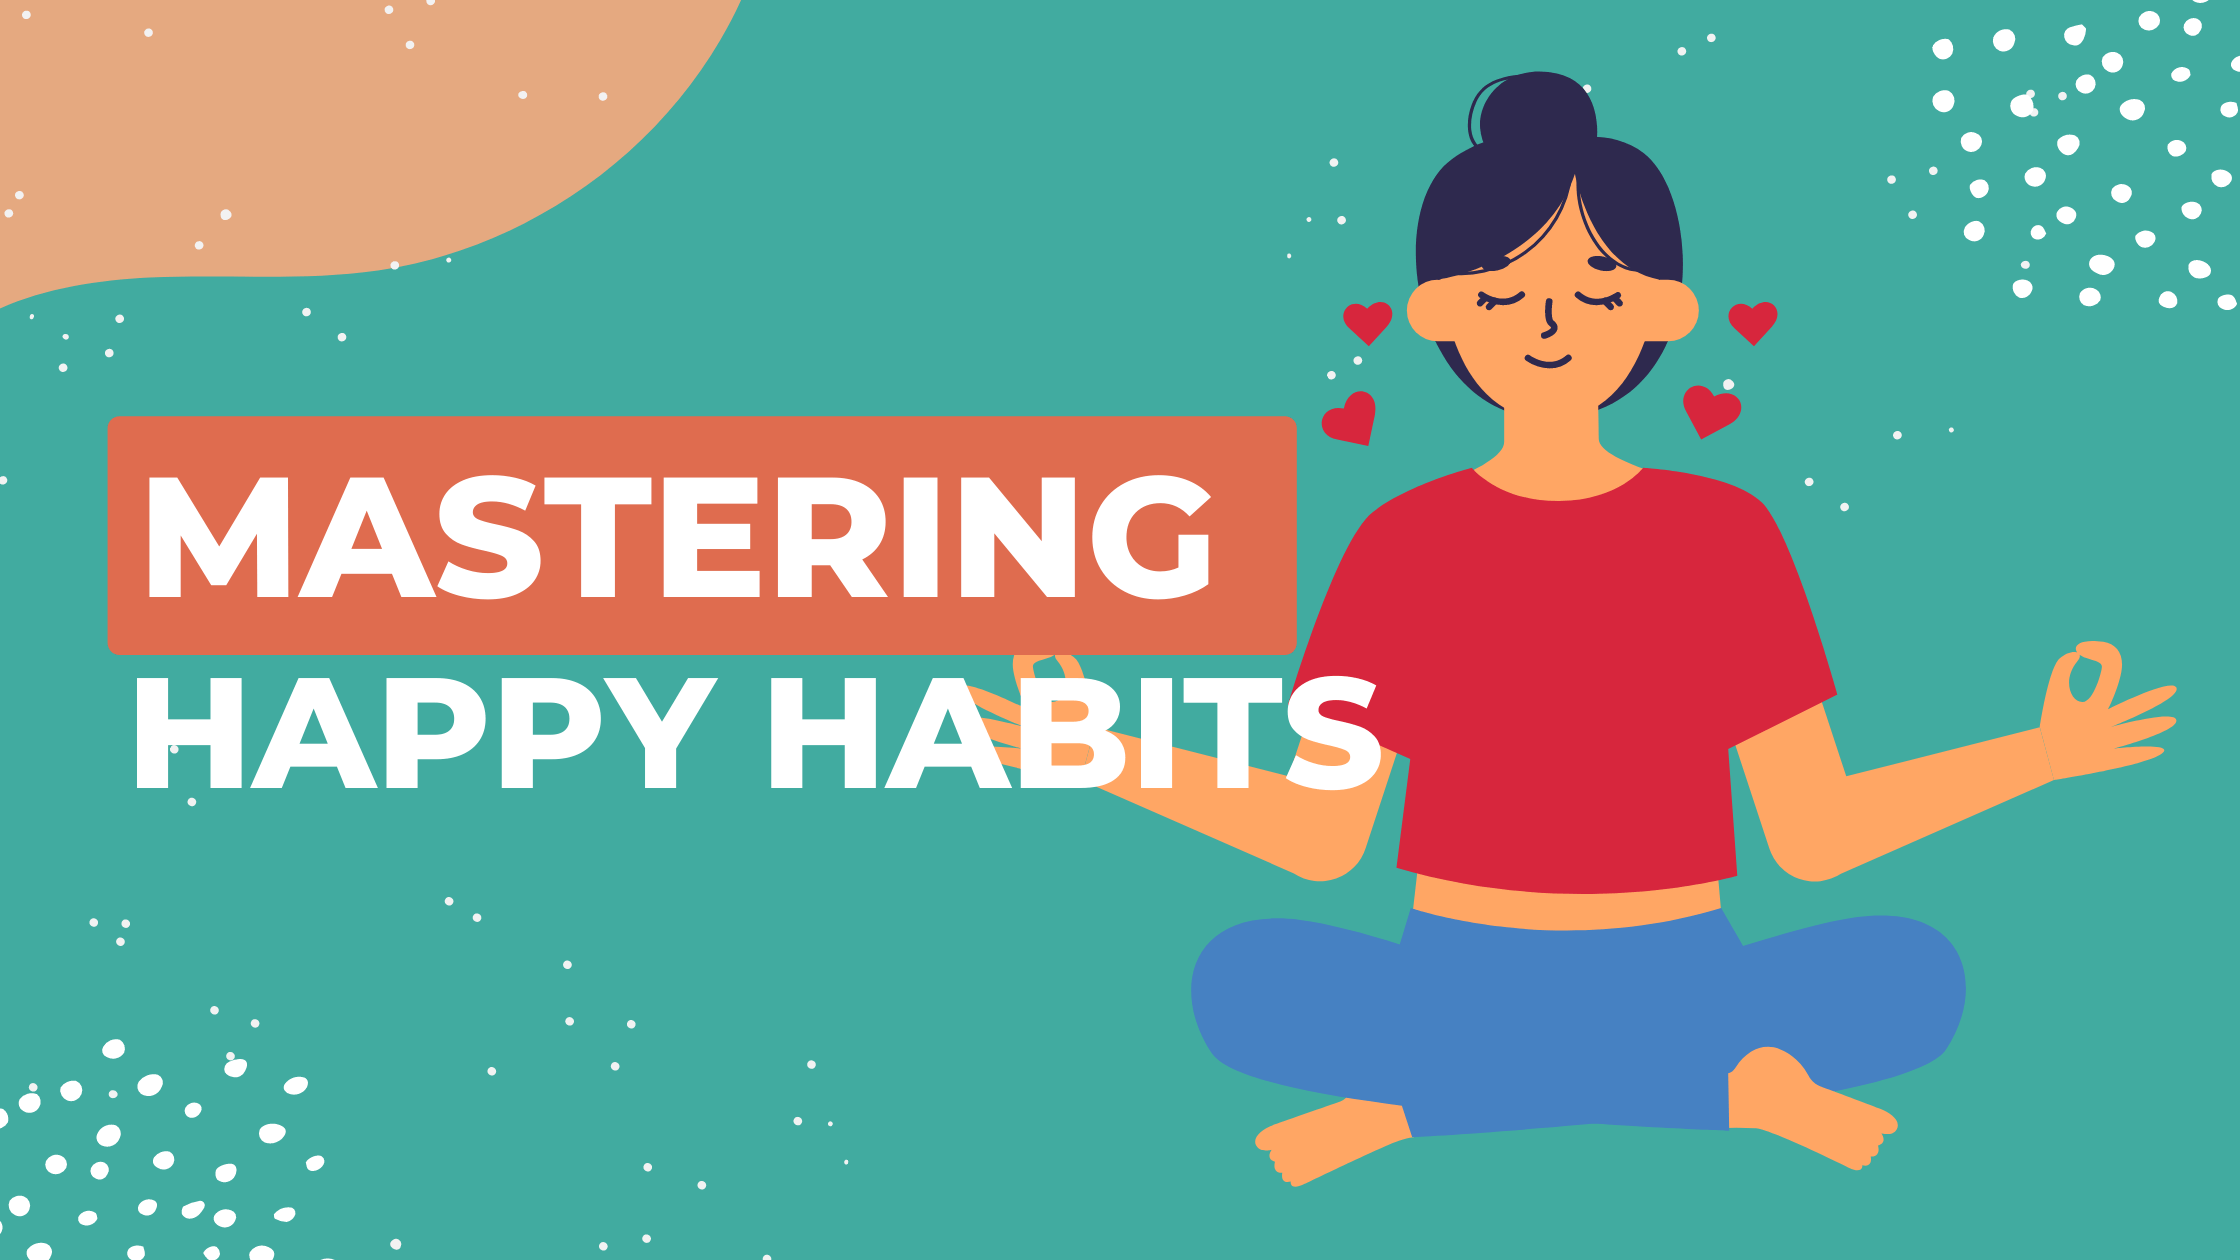 Mastering Happy Habits: Tips for Daily Practice and Accountability